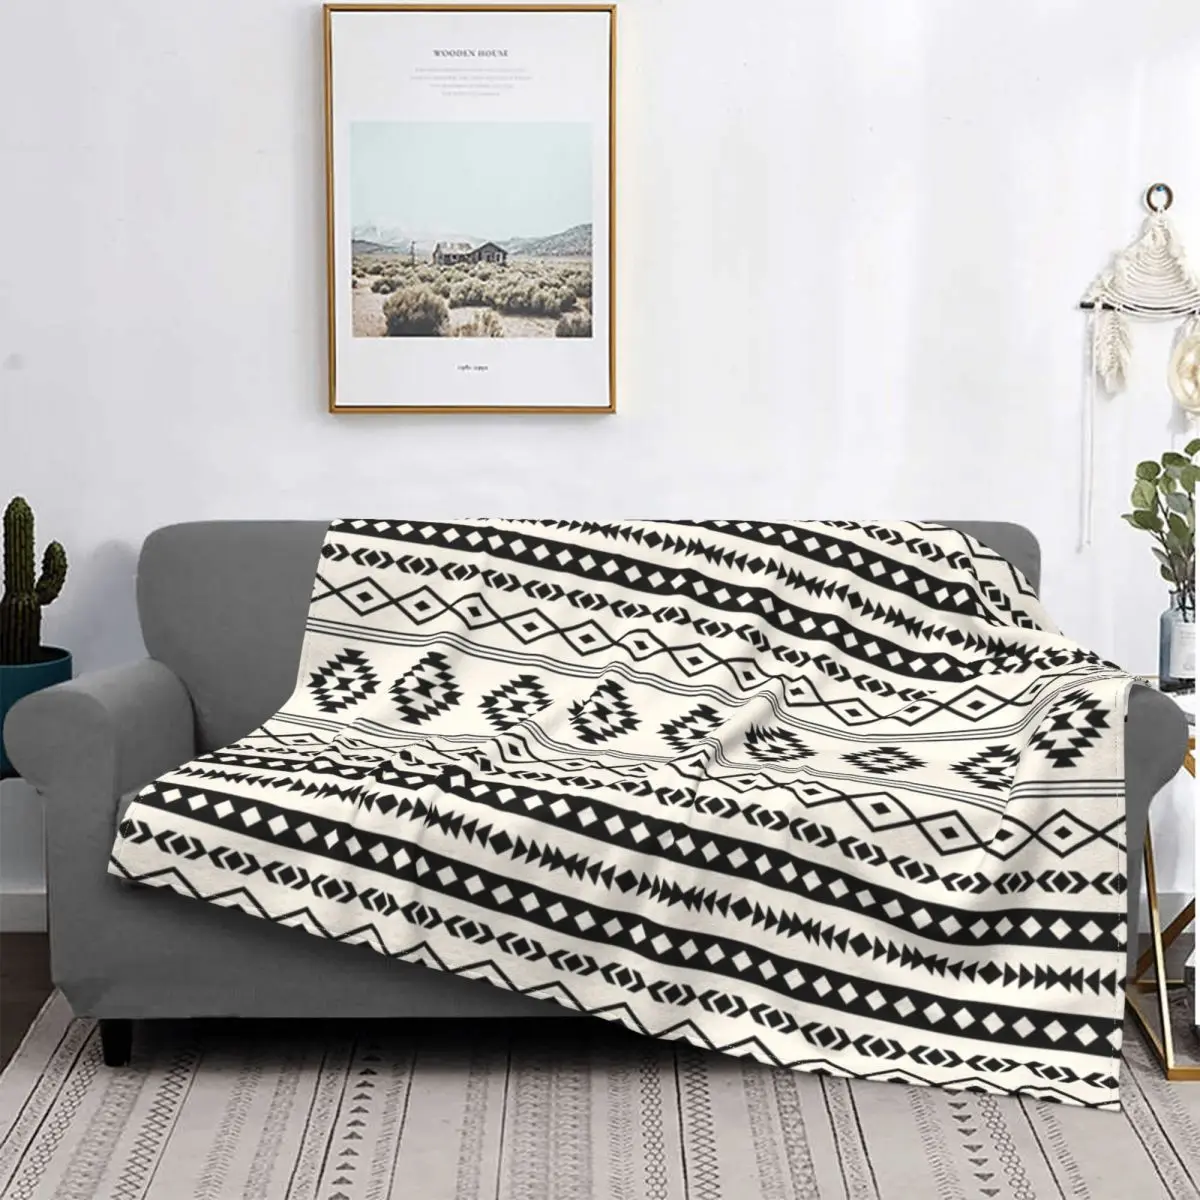 

Bohemian Aztec Black On Cream Mixed Motifs Blanket Flannel Decoration Super Warm Throw Blankets for Bed Couch Plush Thin Quilt